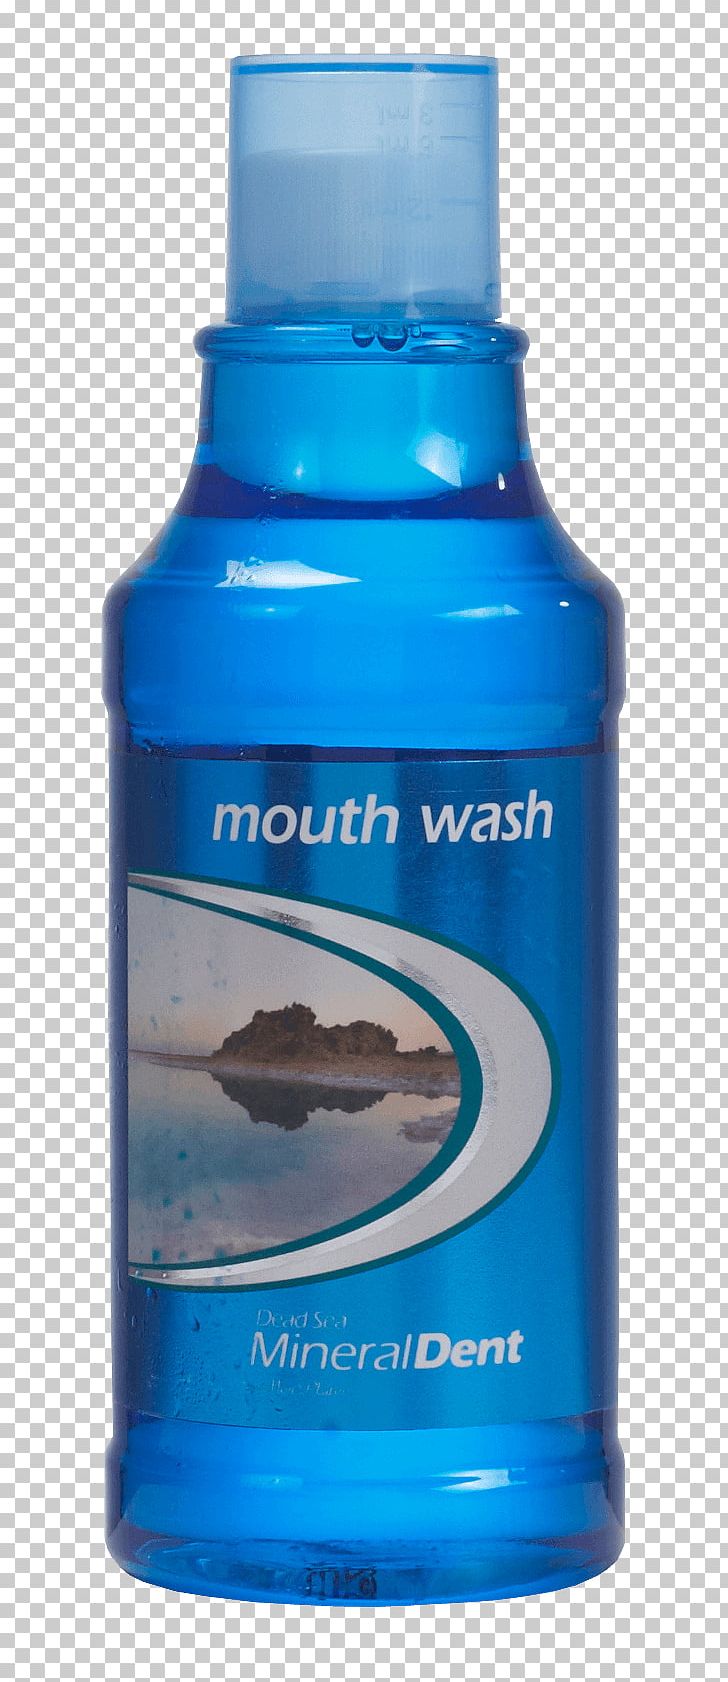 Mouthwash Dead Sea Mineral Tooth PNG, Clipart, Bottle, Cosmetics, Cream, Dead Sea, Dead Sea Salt Free PNG Download